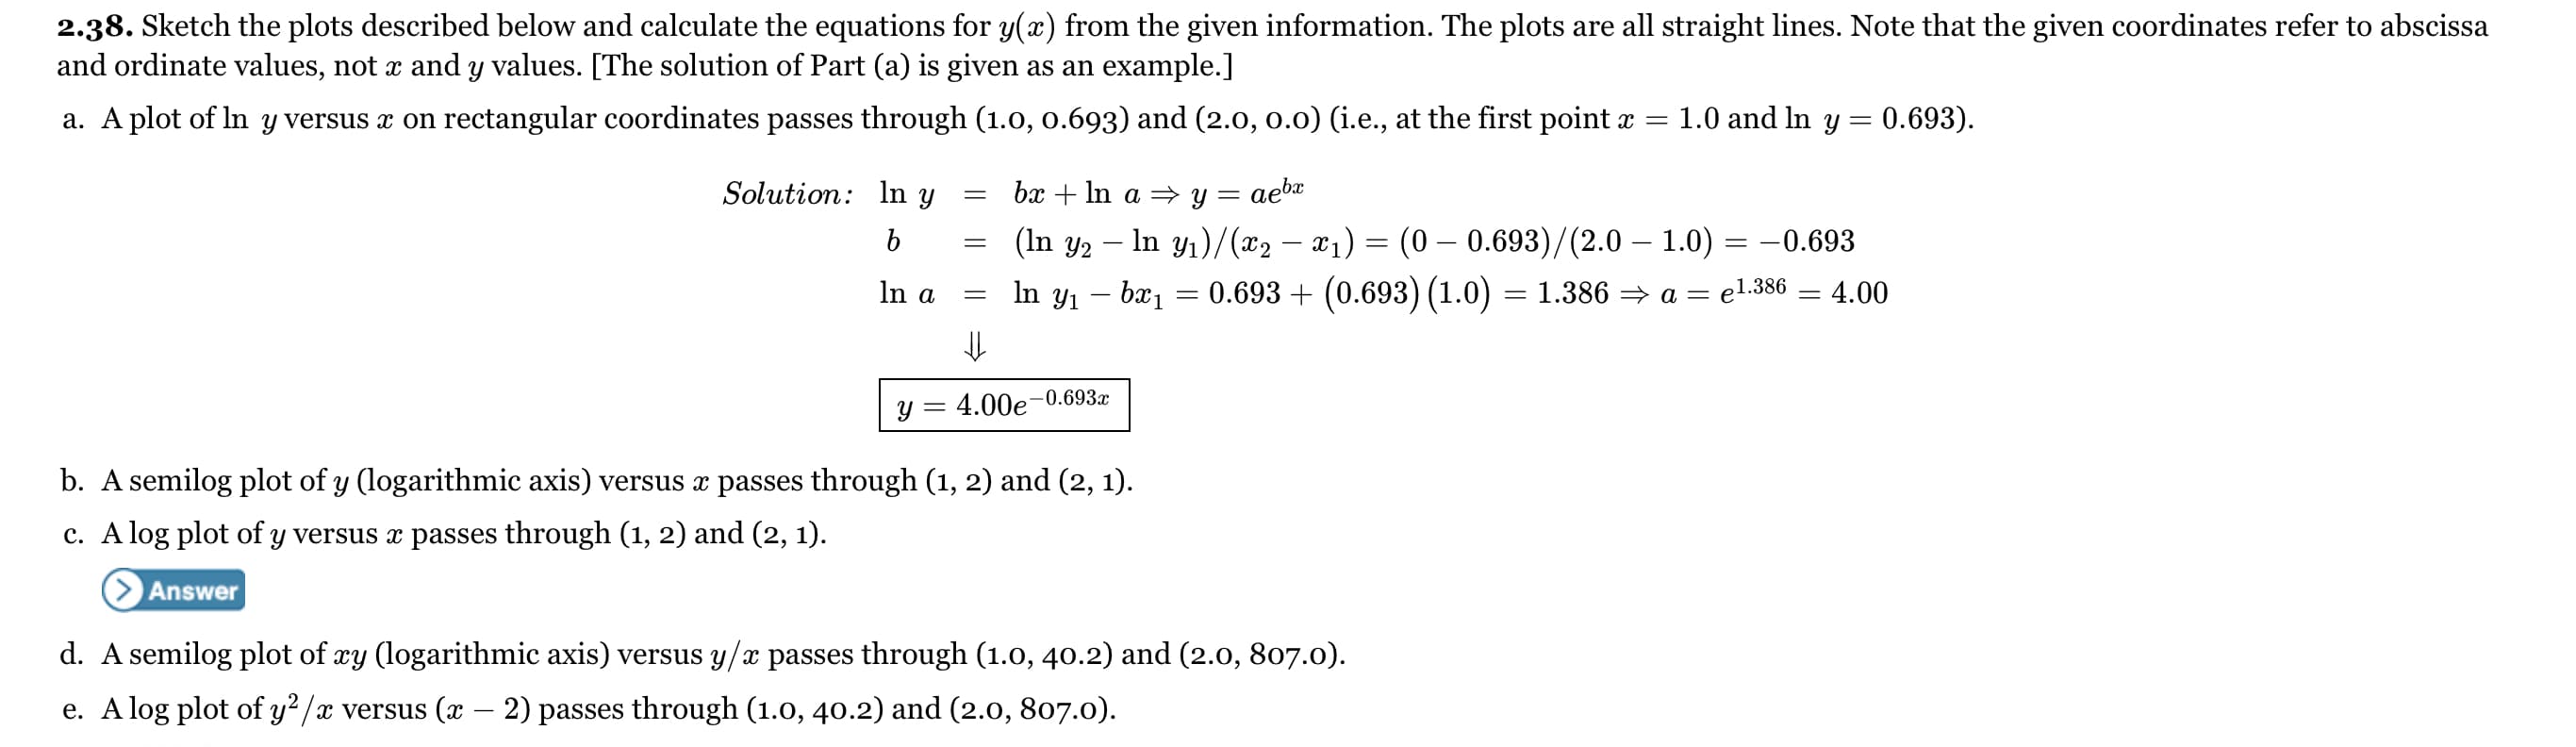 2.38. Sketch the plots described below and calculate the equations for y(x) from the given information. The plots are all straight lines. Note that the given coordinates refer to abscissa
and ordinate values, not x and y values. [The solution of Part (a) is given as an example.]
a. A plot of In y versus x on rectangular coordinates passes through (1.0, 0.693) and (2.0, 0.0) (i.e., at the first point x
1.0 and In y =
0.693).
Solution: In y
bx + In a = y = aebæ
(In y2 – In y1)/(x2 – x1)
(0 – 0.693)/(2.0 – 1.0) = –0.693
In a
In y1 – bx1 = 0.693 + (0.693) (1.0) = 1.386 = a = el.386 = 4.00
y = 4.00e-0.693x
b. A semilog plot of y (logarithmic axis) versus x passes through (1, 2) and (2, 1).
c. A log plot of y versus æ passes through (1, 2) and (2, 1).
Answer
d. A semilog plot of xy (logarithmic axis) versus y/x passes through (1.0, 40.2) and (2.0, 807.0).
e. A log plot of y² /x versus (x - 2) passes through (1.0, 40.2) and (2.0, 807.0).
